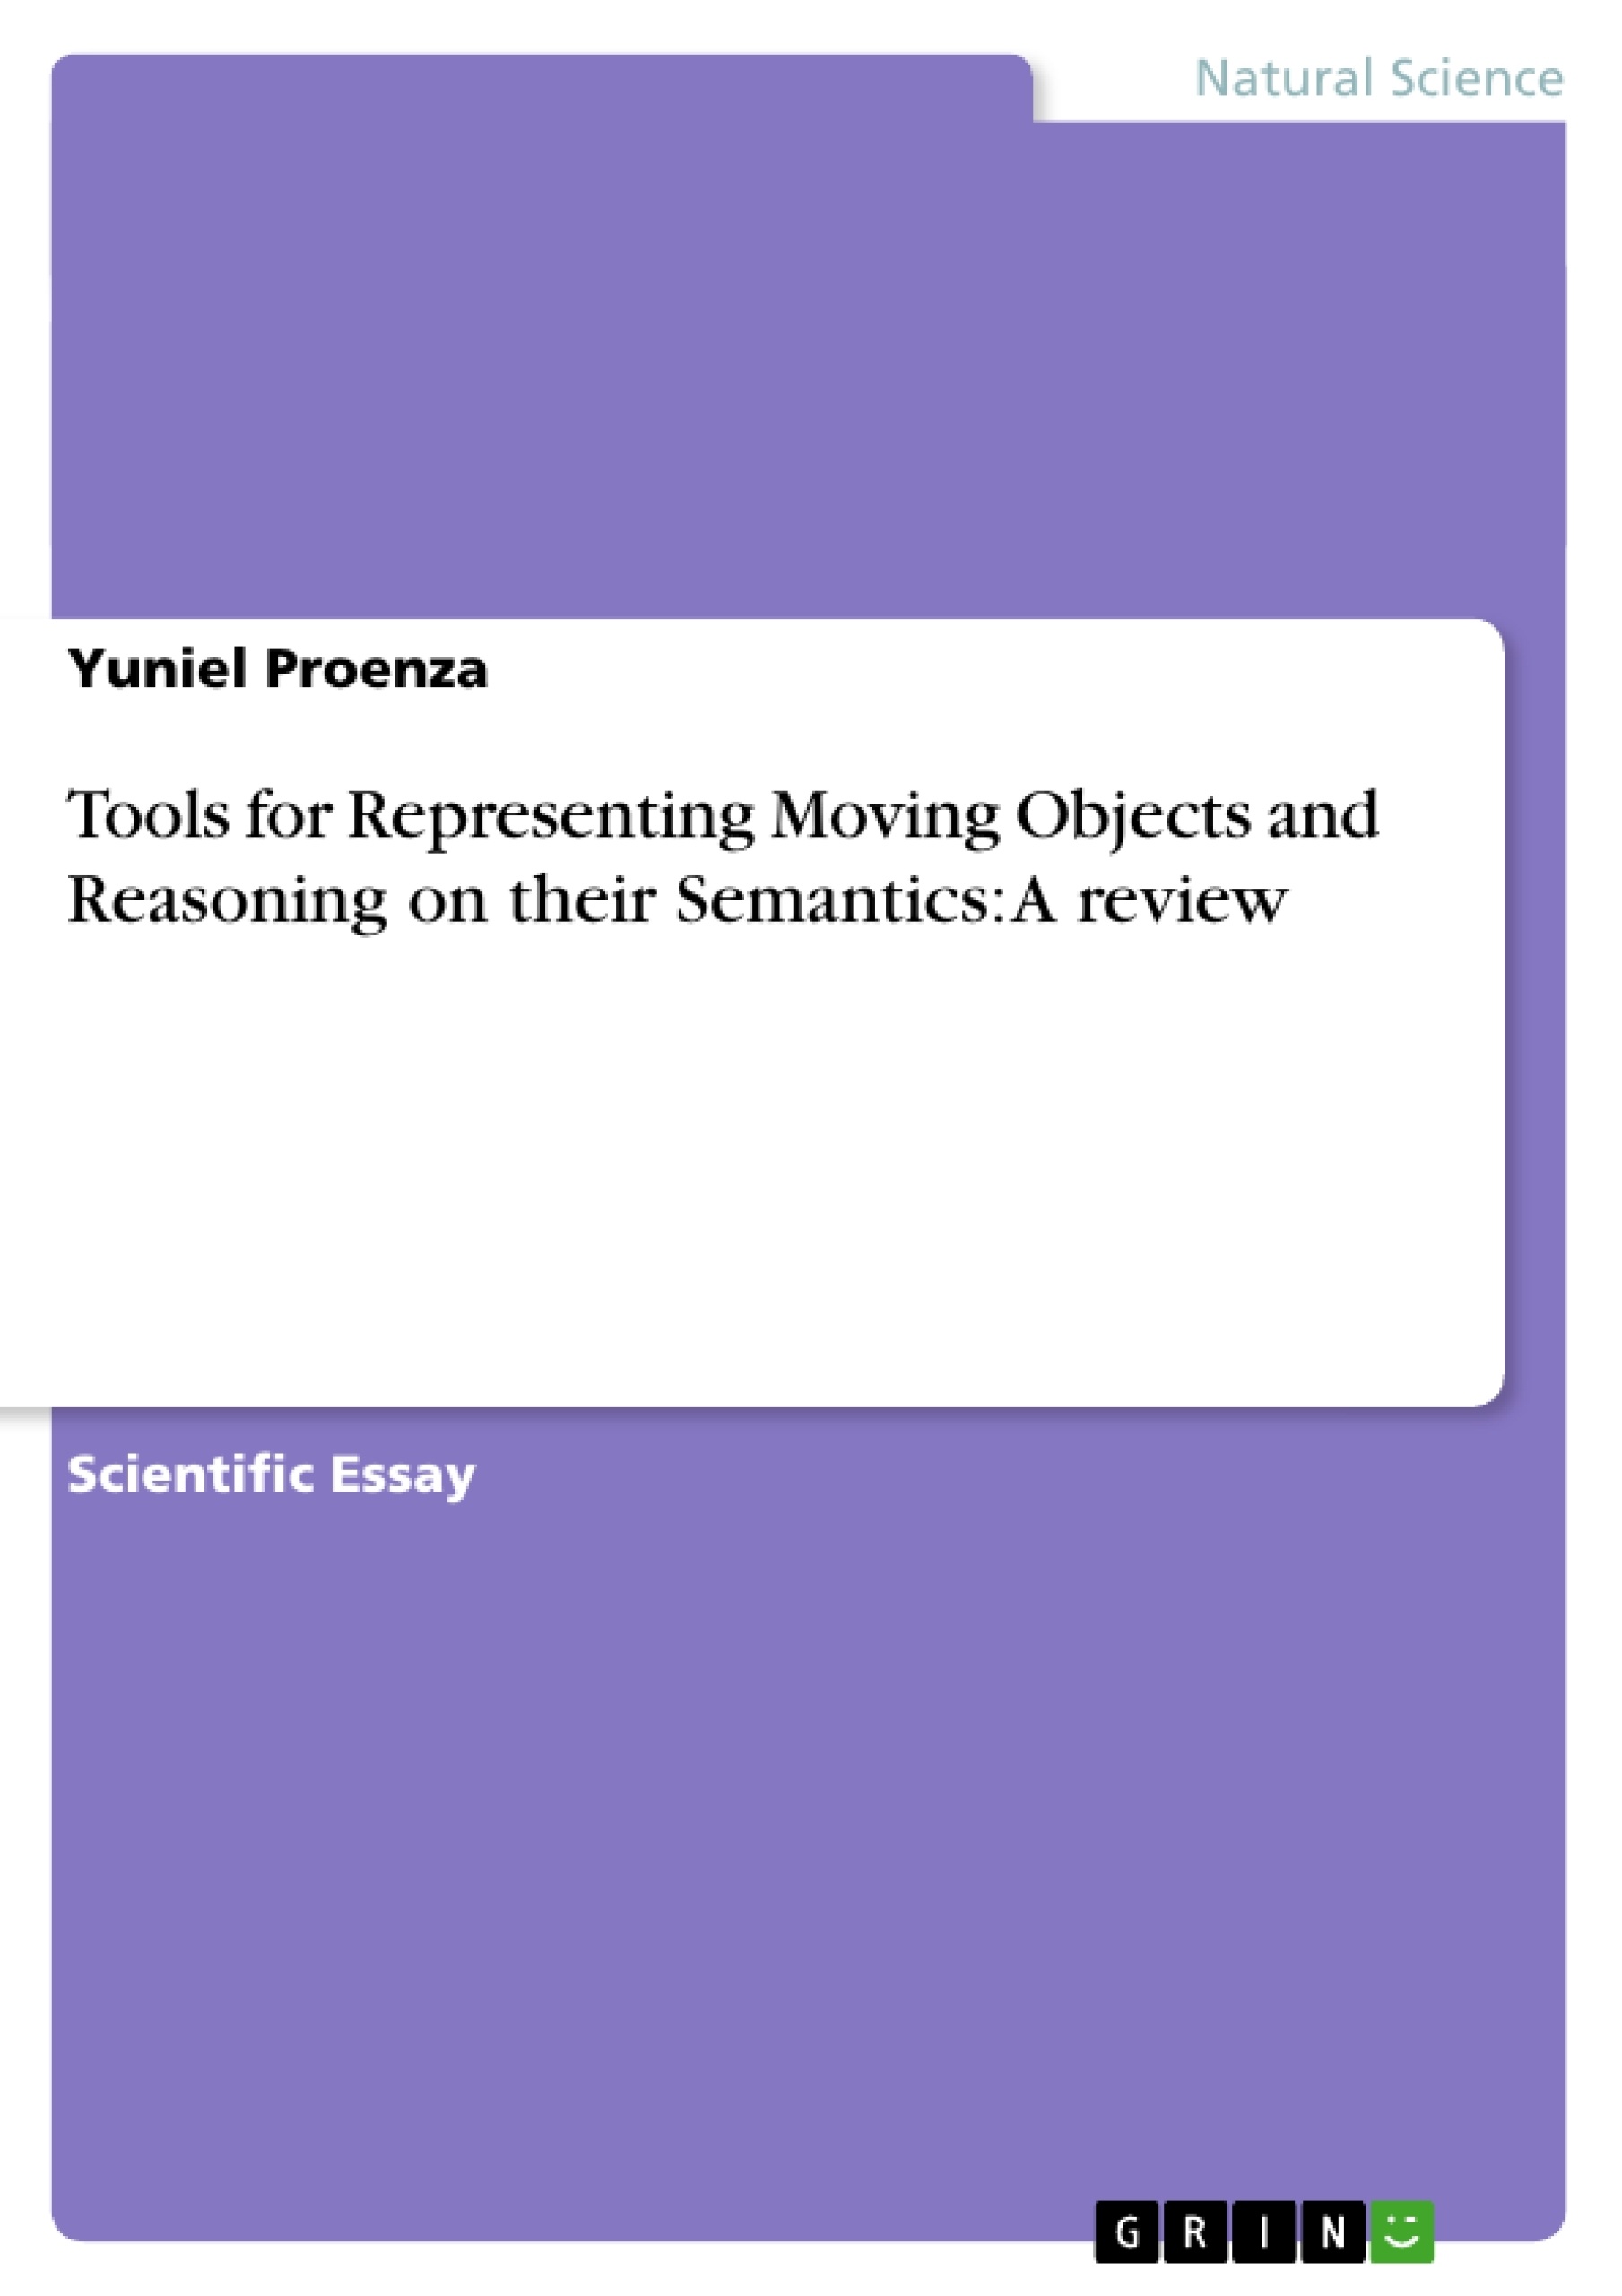 Title: Tools for Representing Moving Objects and Reasoning on their Semantics: A review